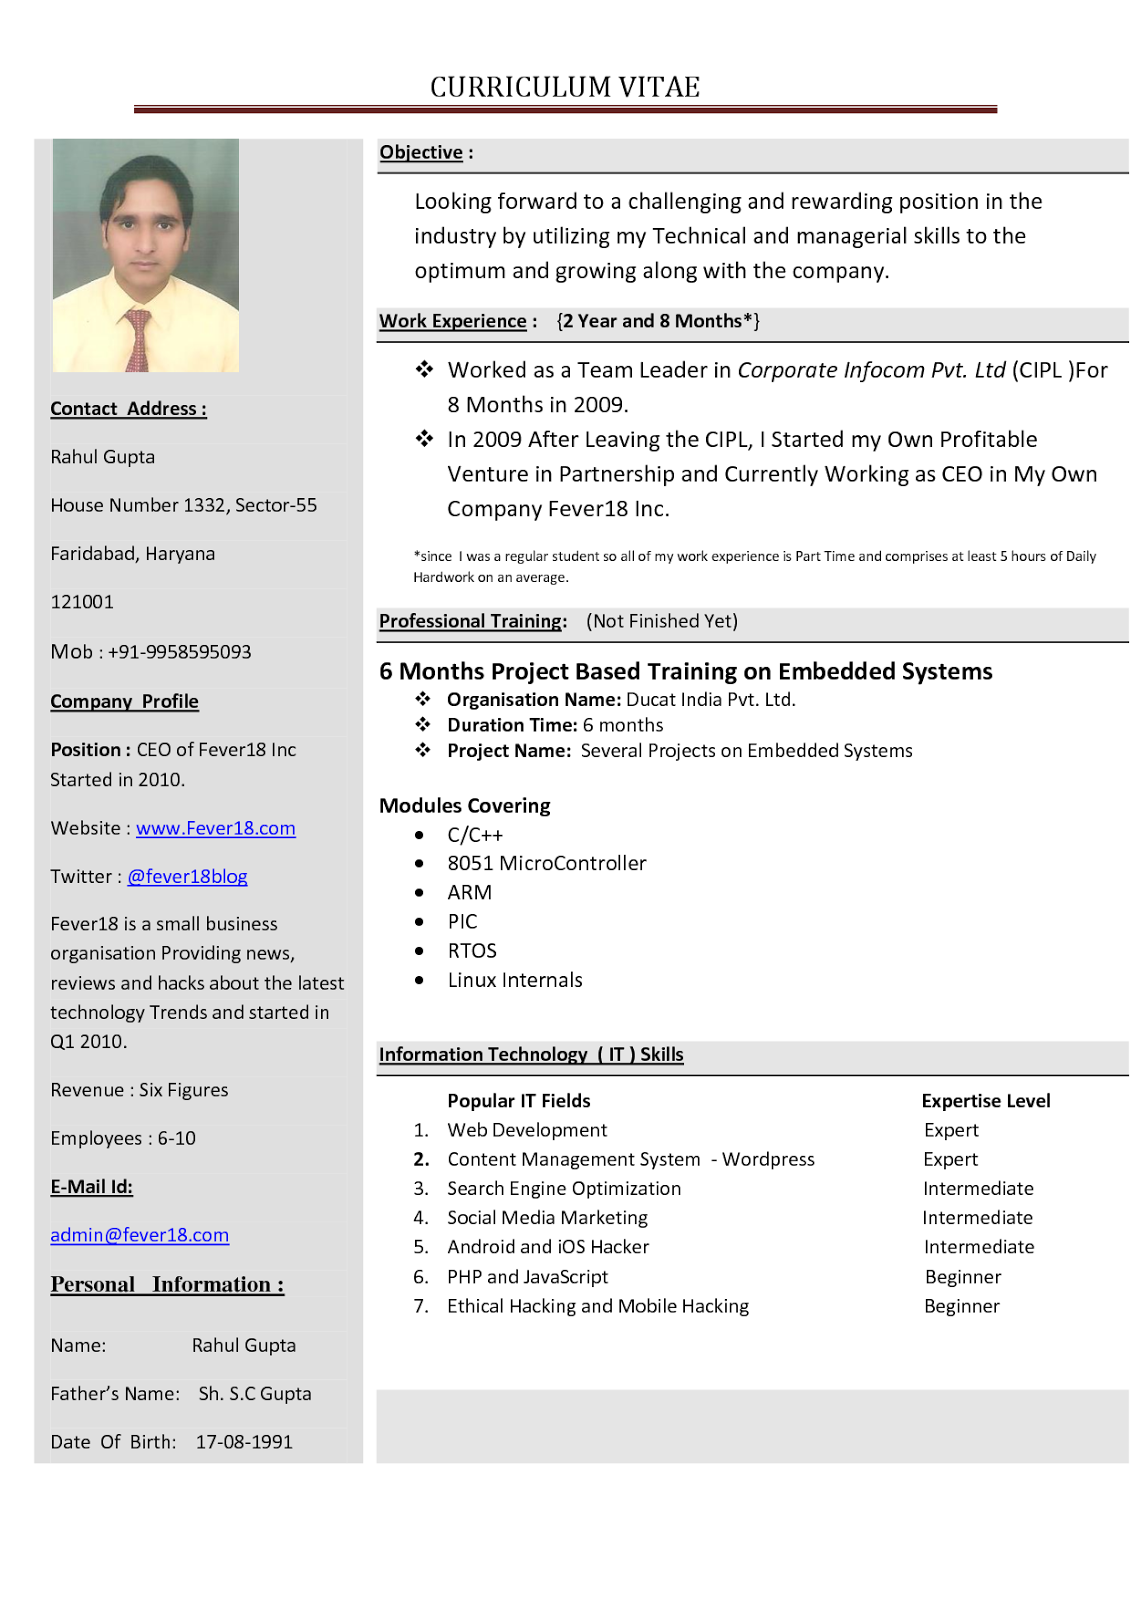 How do you post a resume online